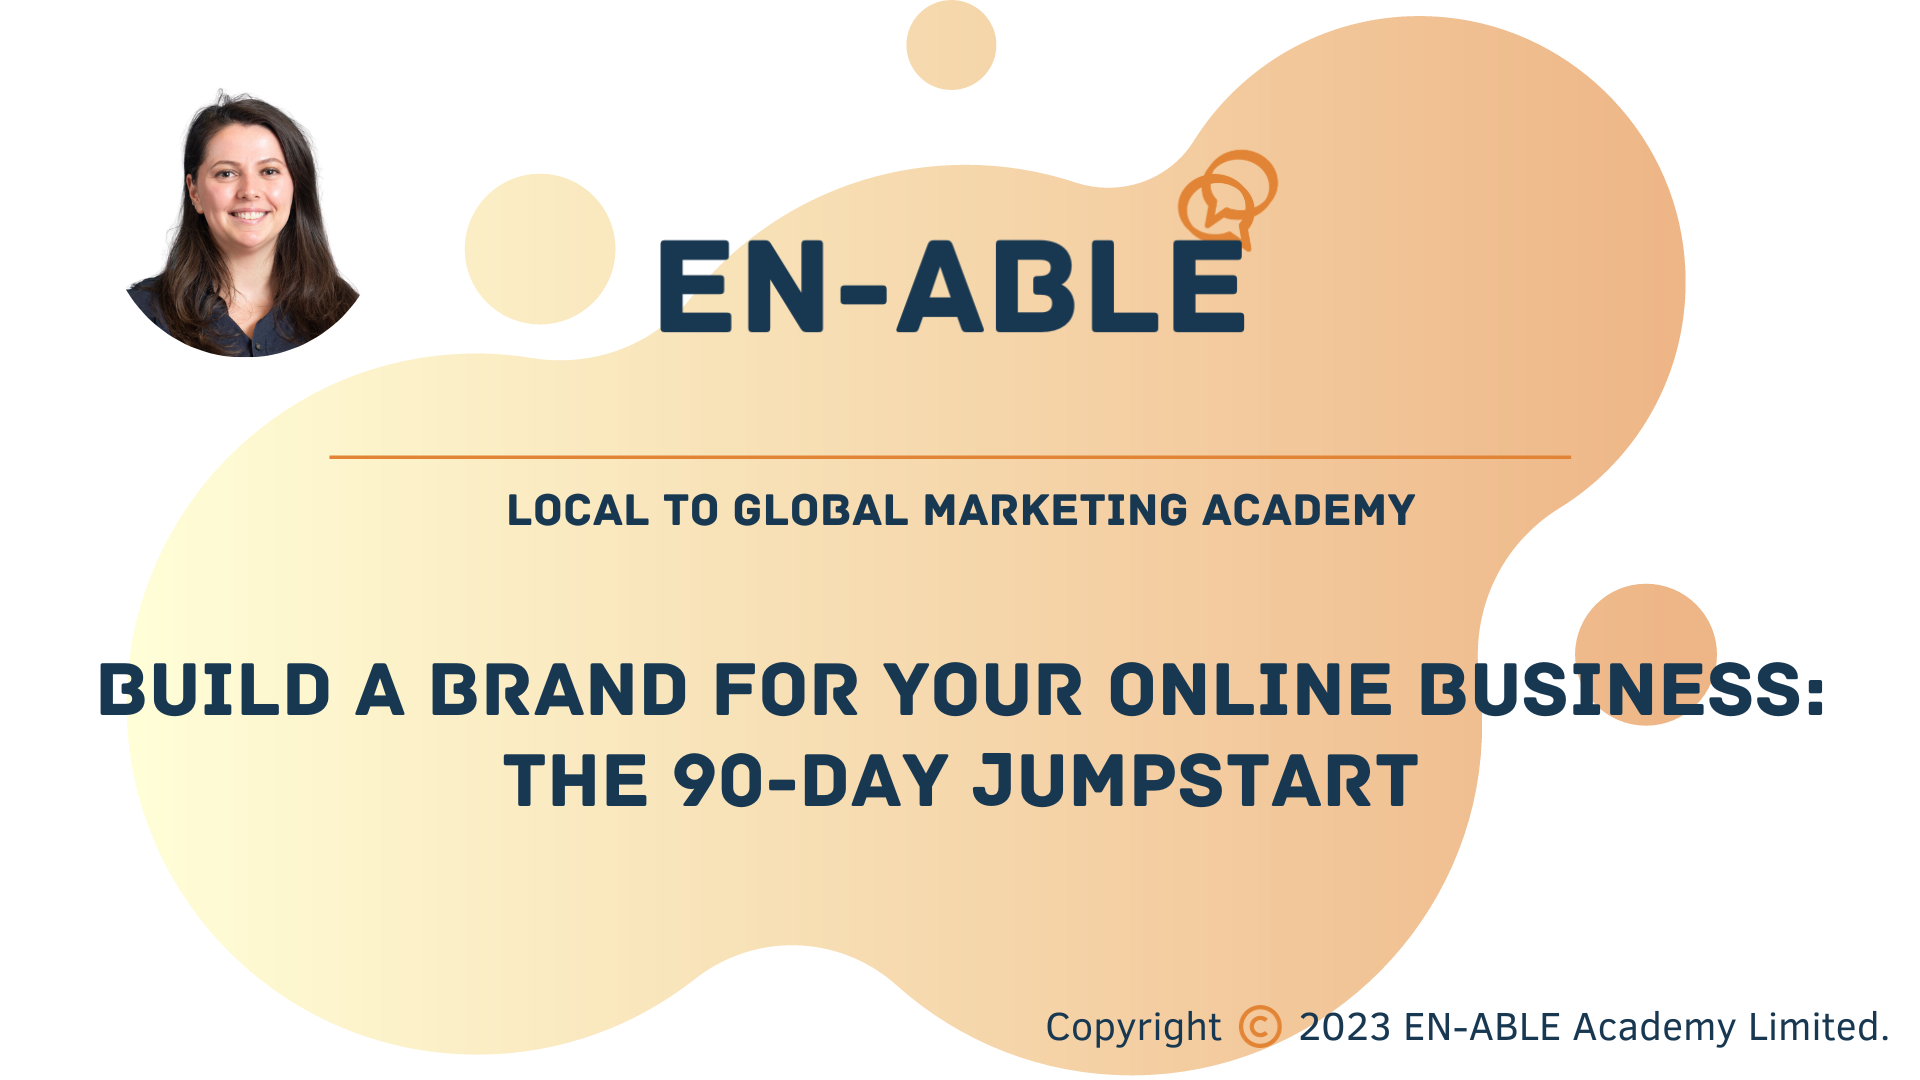 Build a Brand for Your Online Business: 90-Day Jumpstart